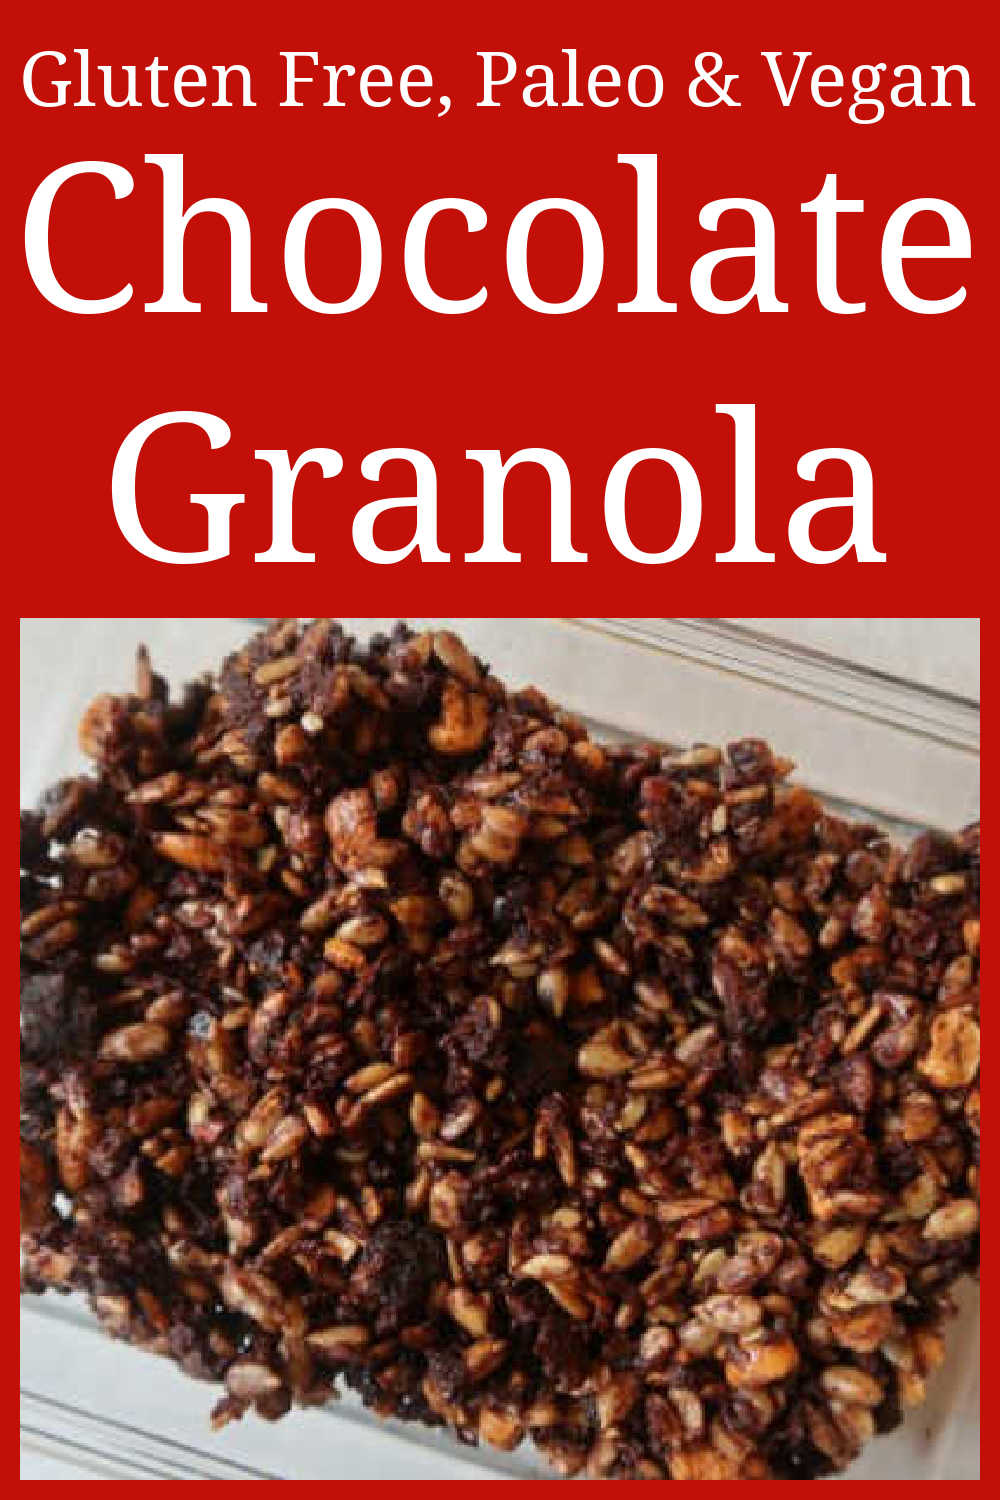 Chocolate Granola Recipe - How to make the best simple and easy homemade healthy dark chocolate chunky granola clusters - gluten free, vegan and paleo diet friendly - with the video tutorial.